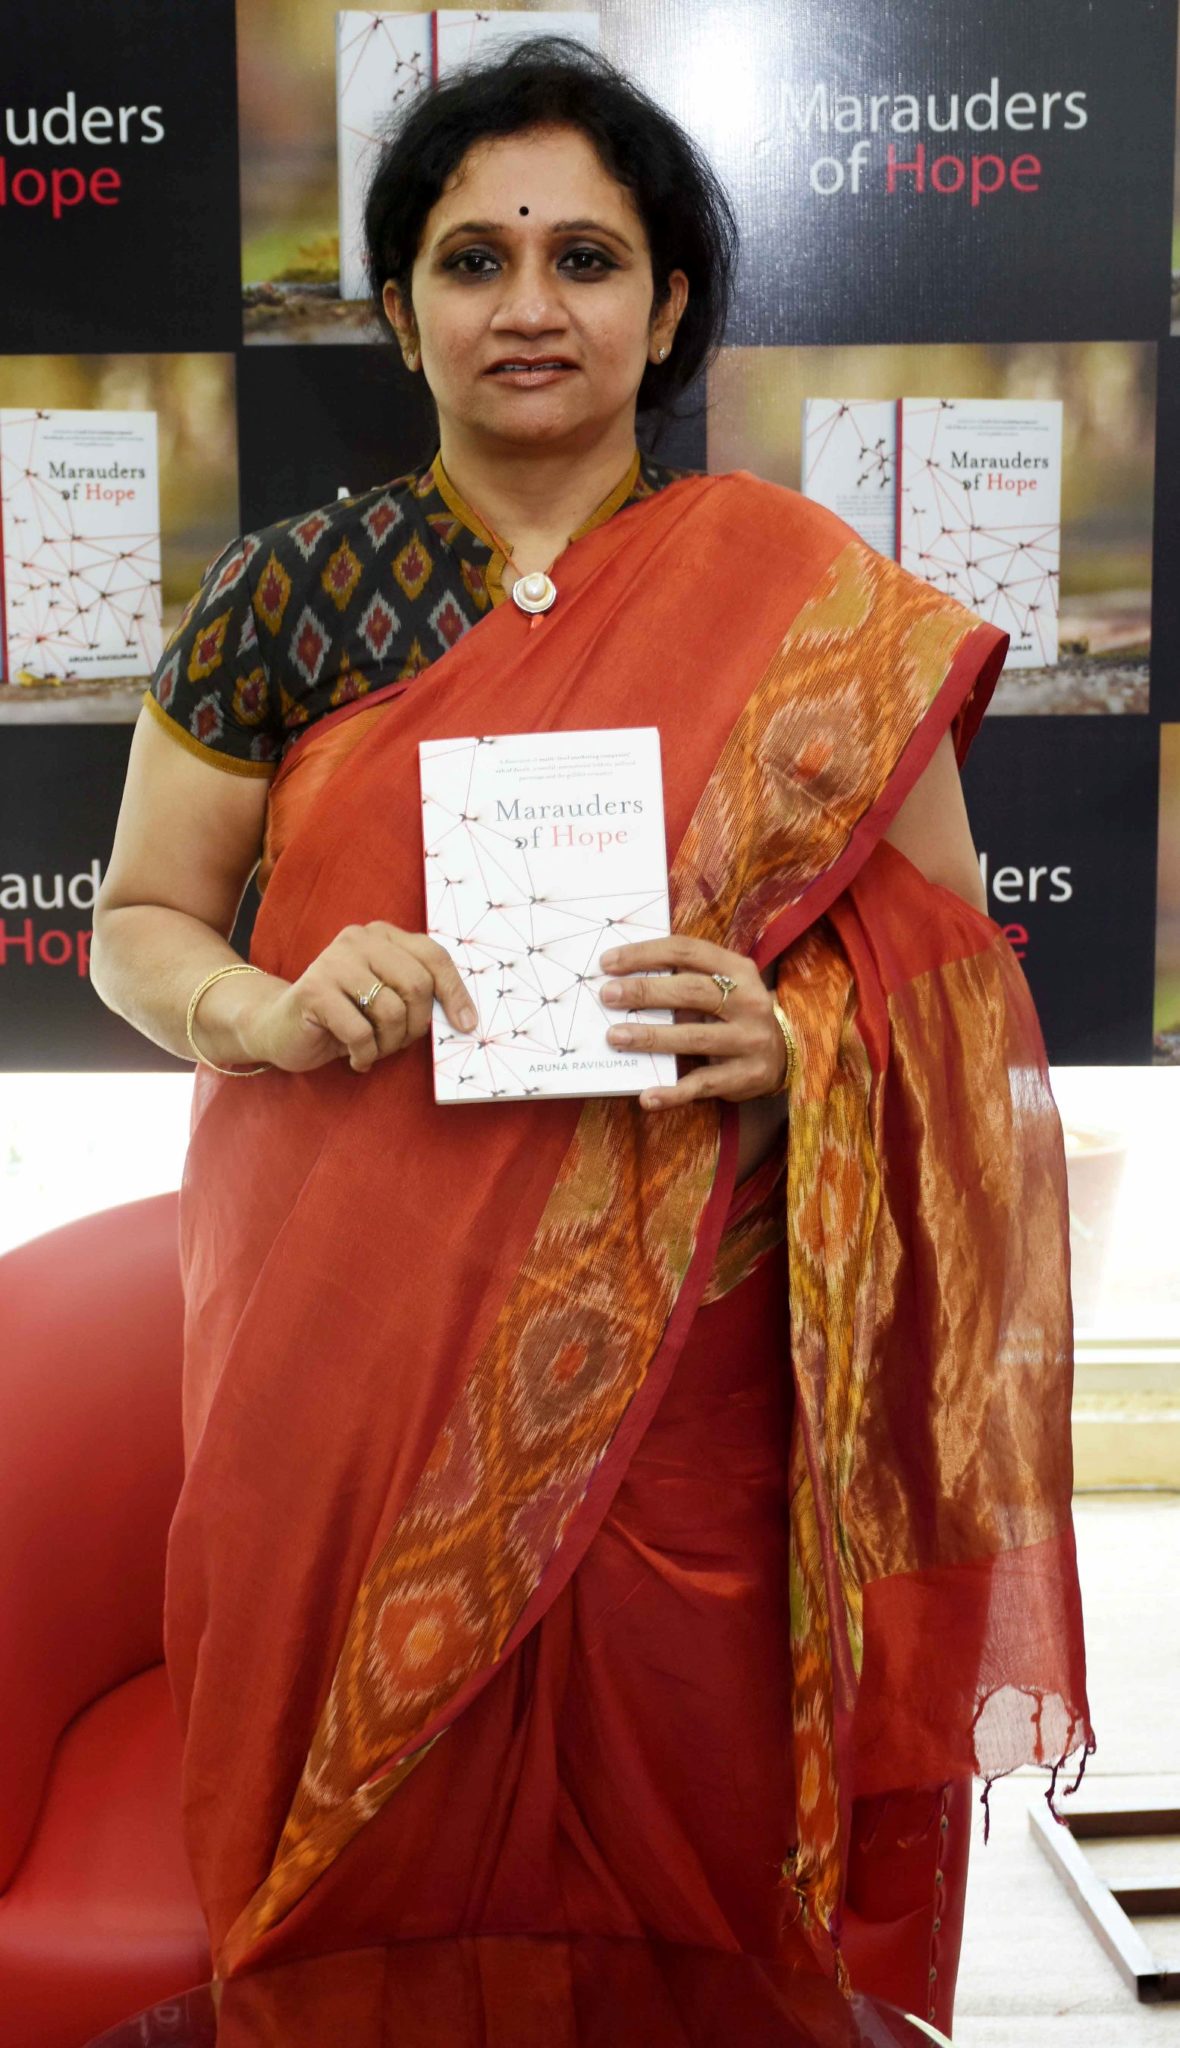 marauders-of-hope-launched-in-jaipur-by-author-aruna-ravikumars